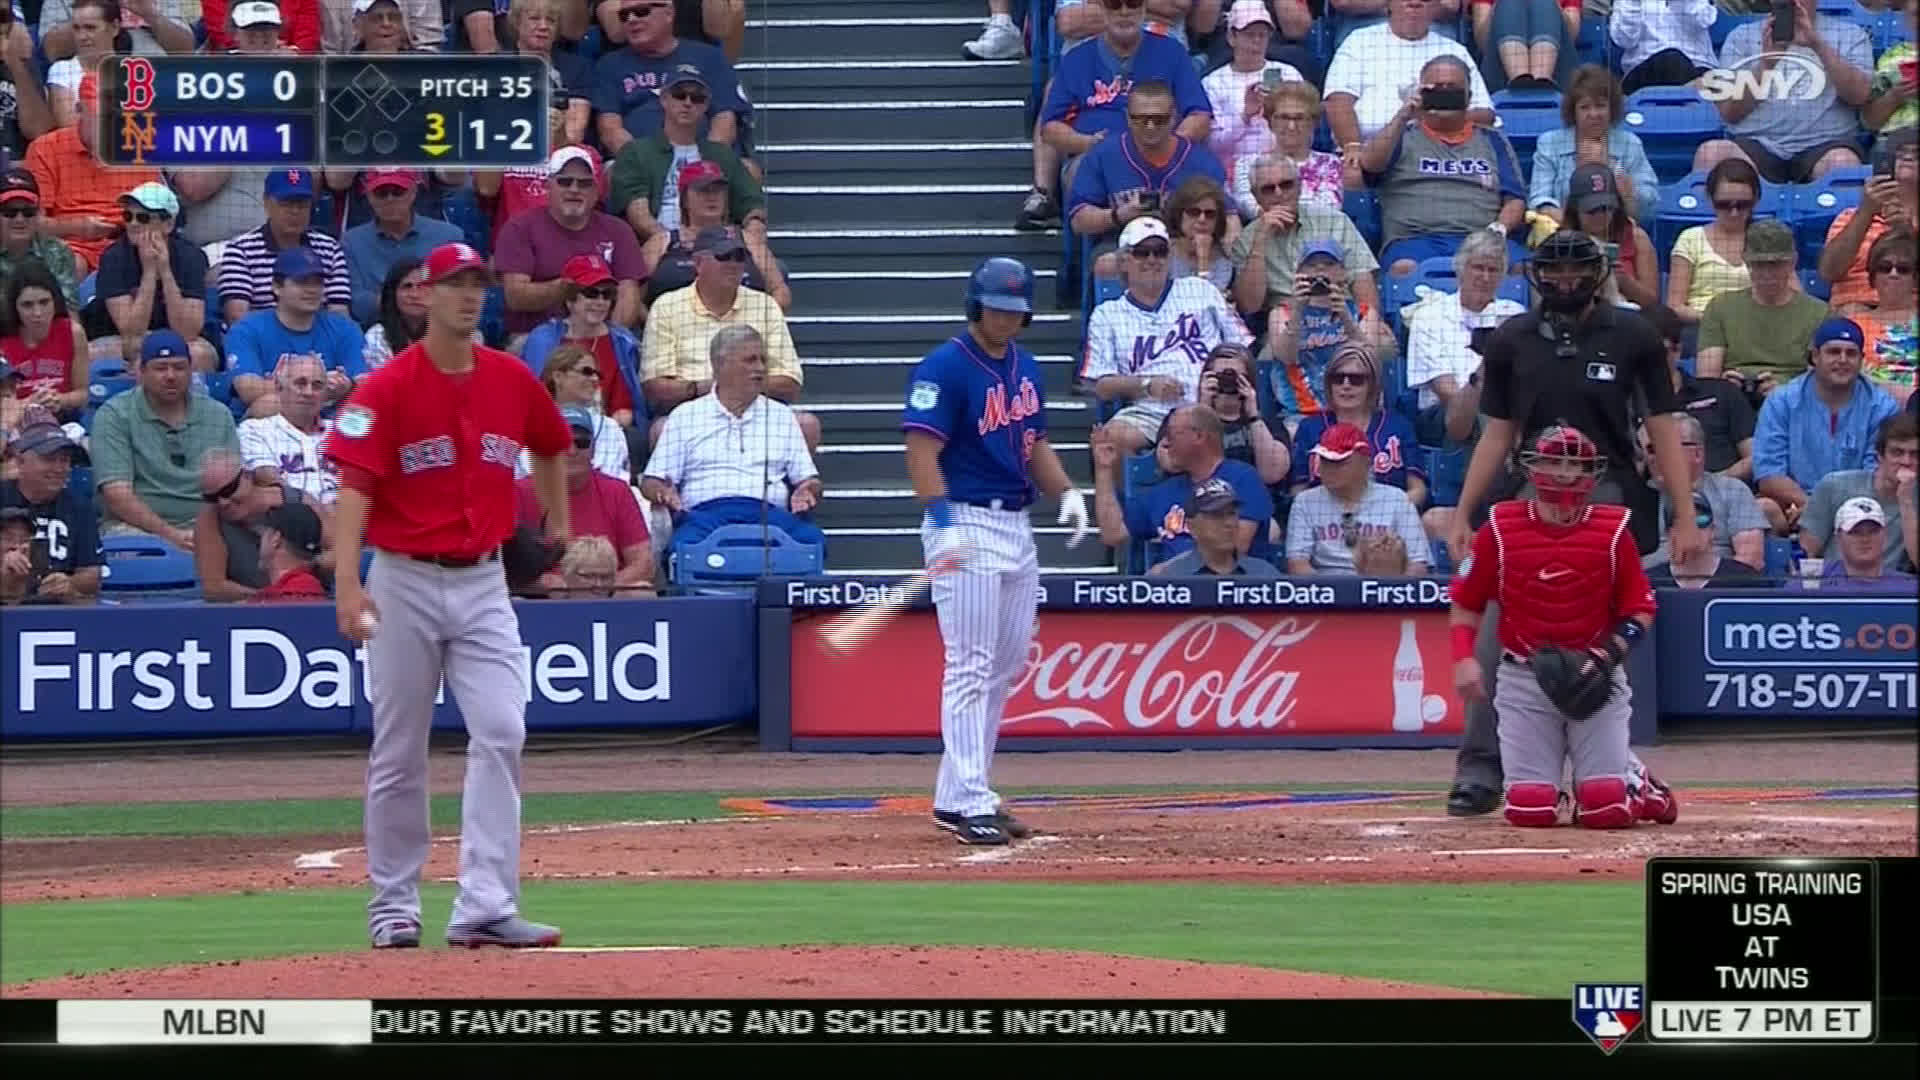 VIDEO: Tim Tebow is So Bad at Baseball He Struck Out Against a